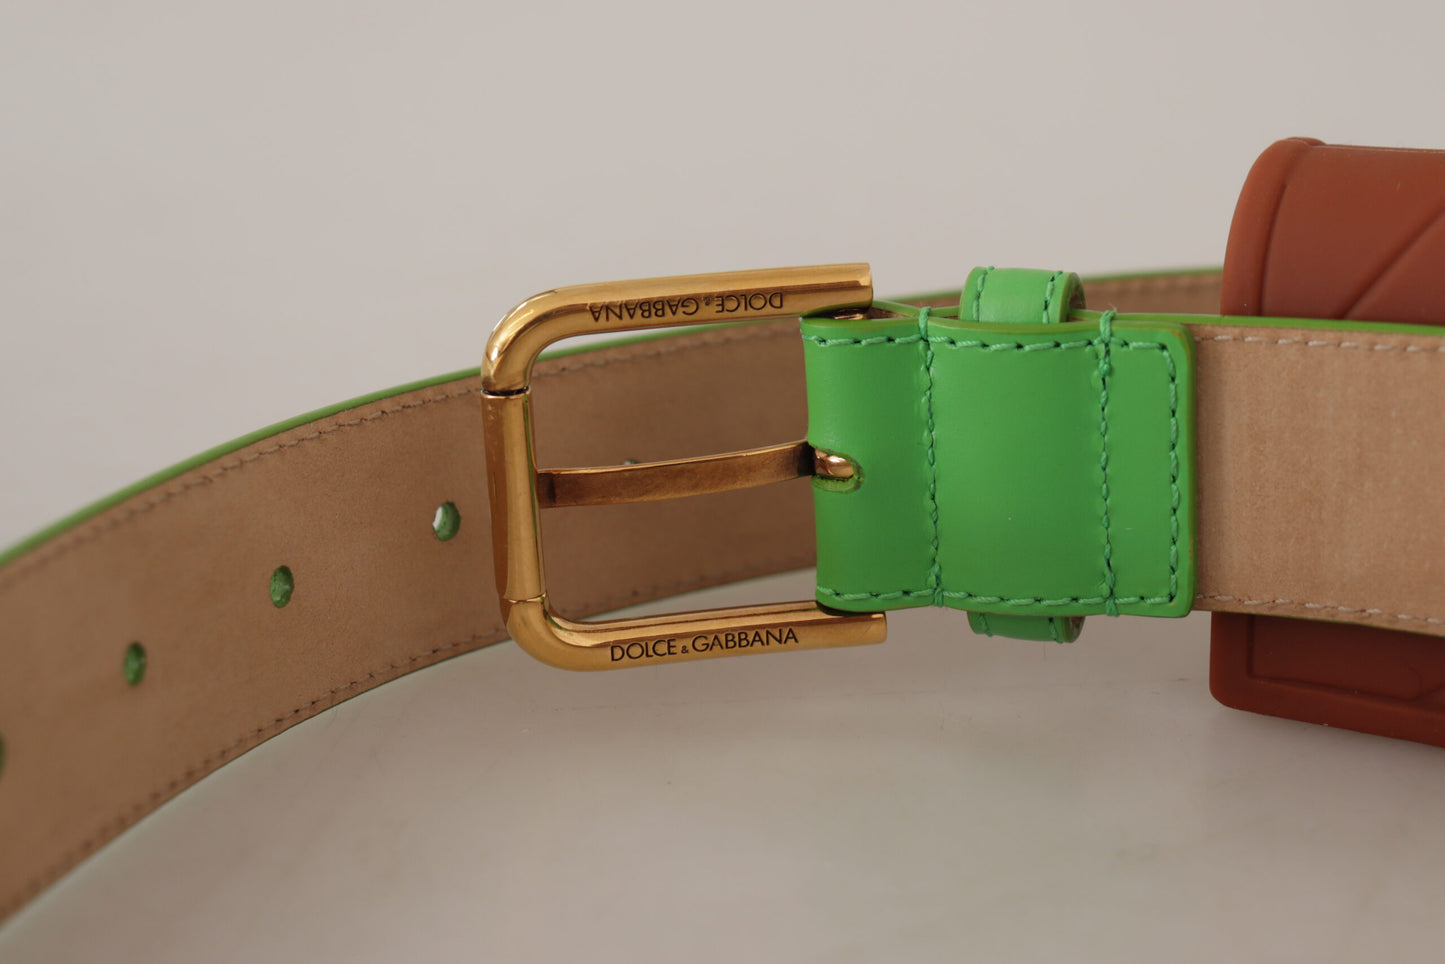 Dolce & Gabbana Chic Emerald Leather Belt with Engraved Buckle